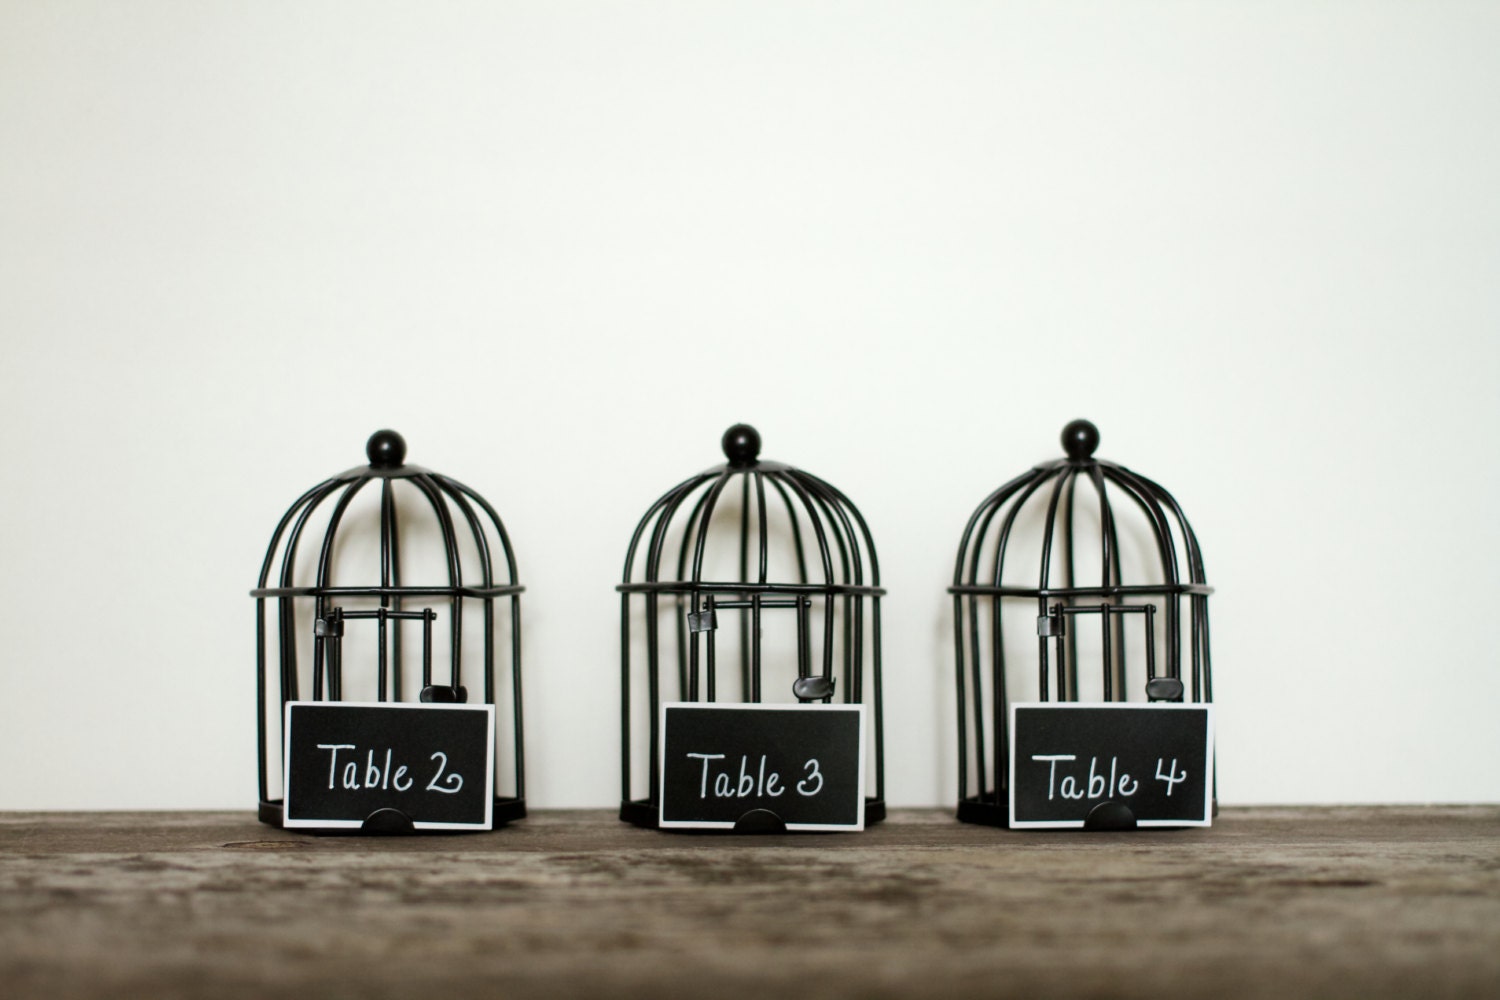 10 Mini Birdcages 4.25" x 2.75" with Chalkboard Label Rustic Weddings Centerpieces Wedding Chalkboards Table Numbers Love Birds Bird Cage